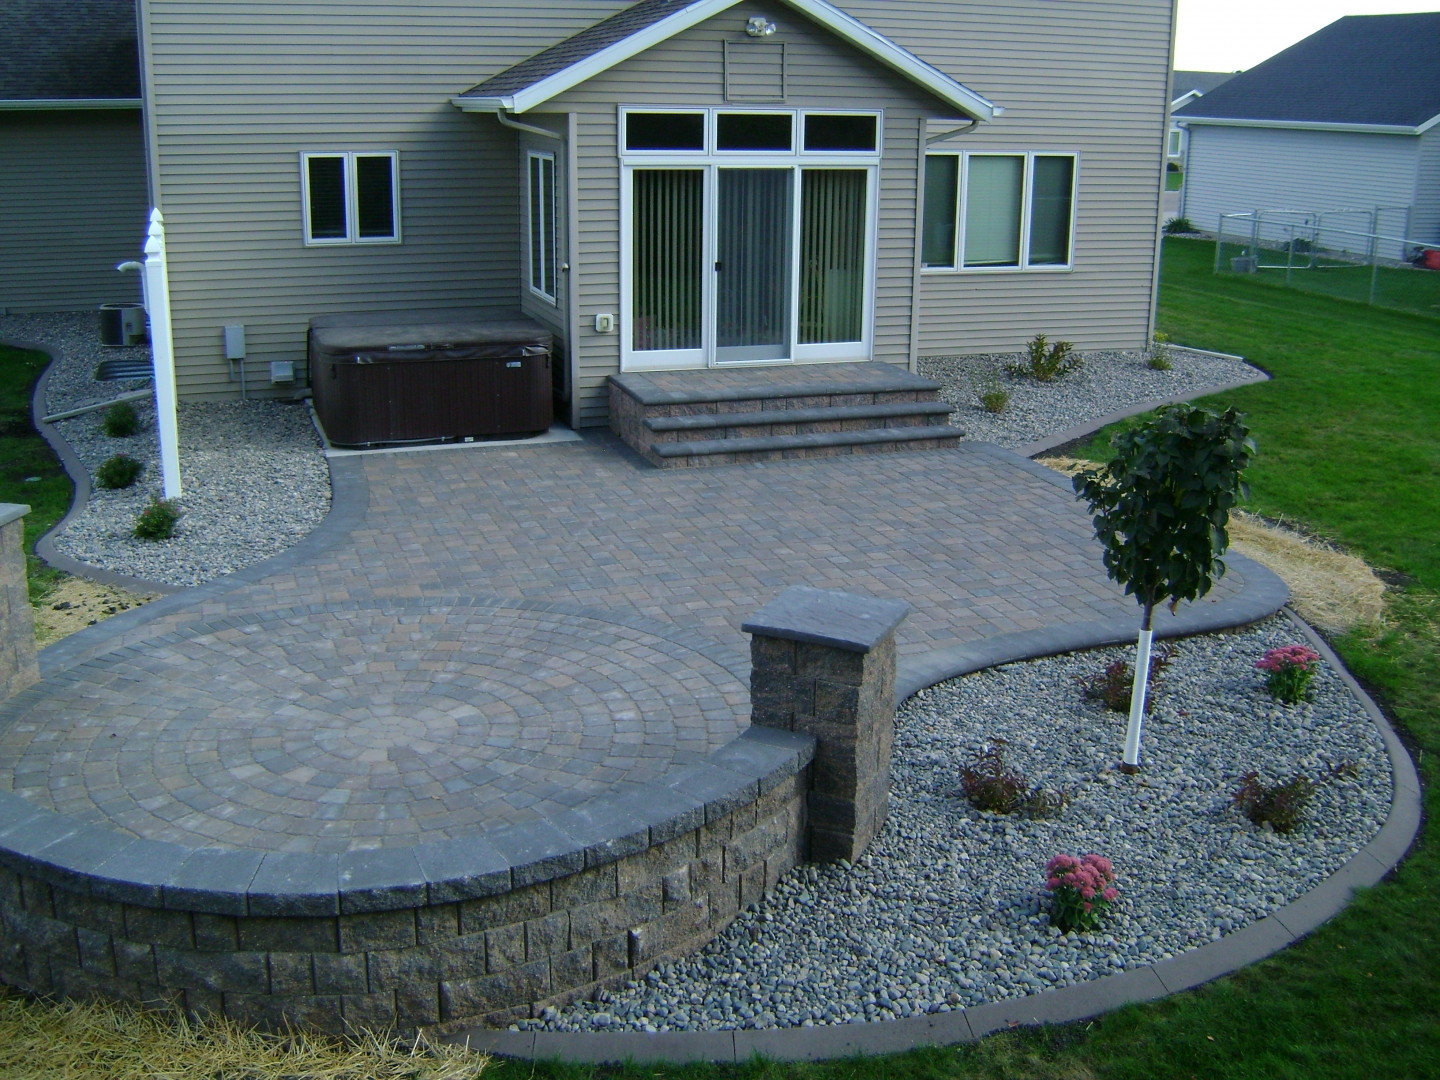 Landscape Around Patio
 Earth Tone Paver Patio with Sitting Wall and Rock Fill